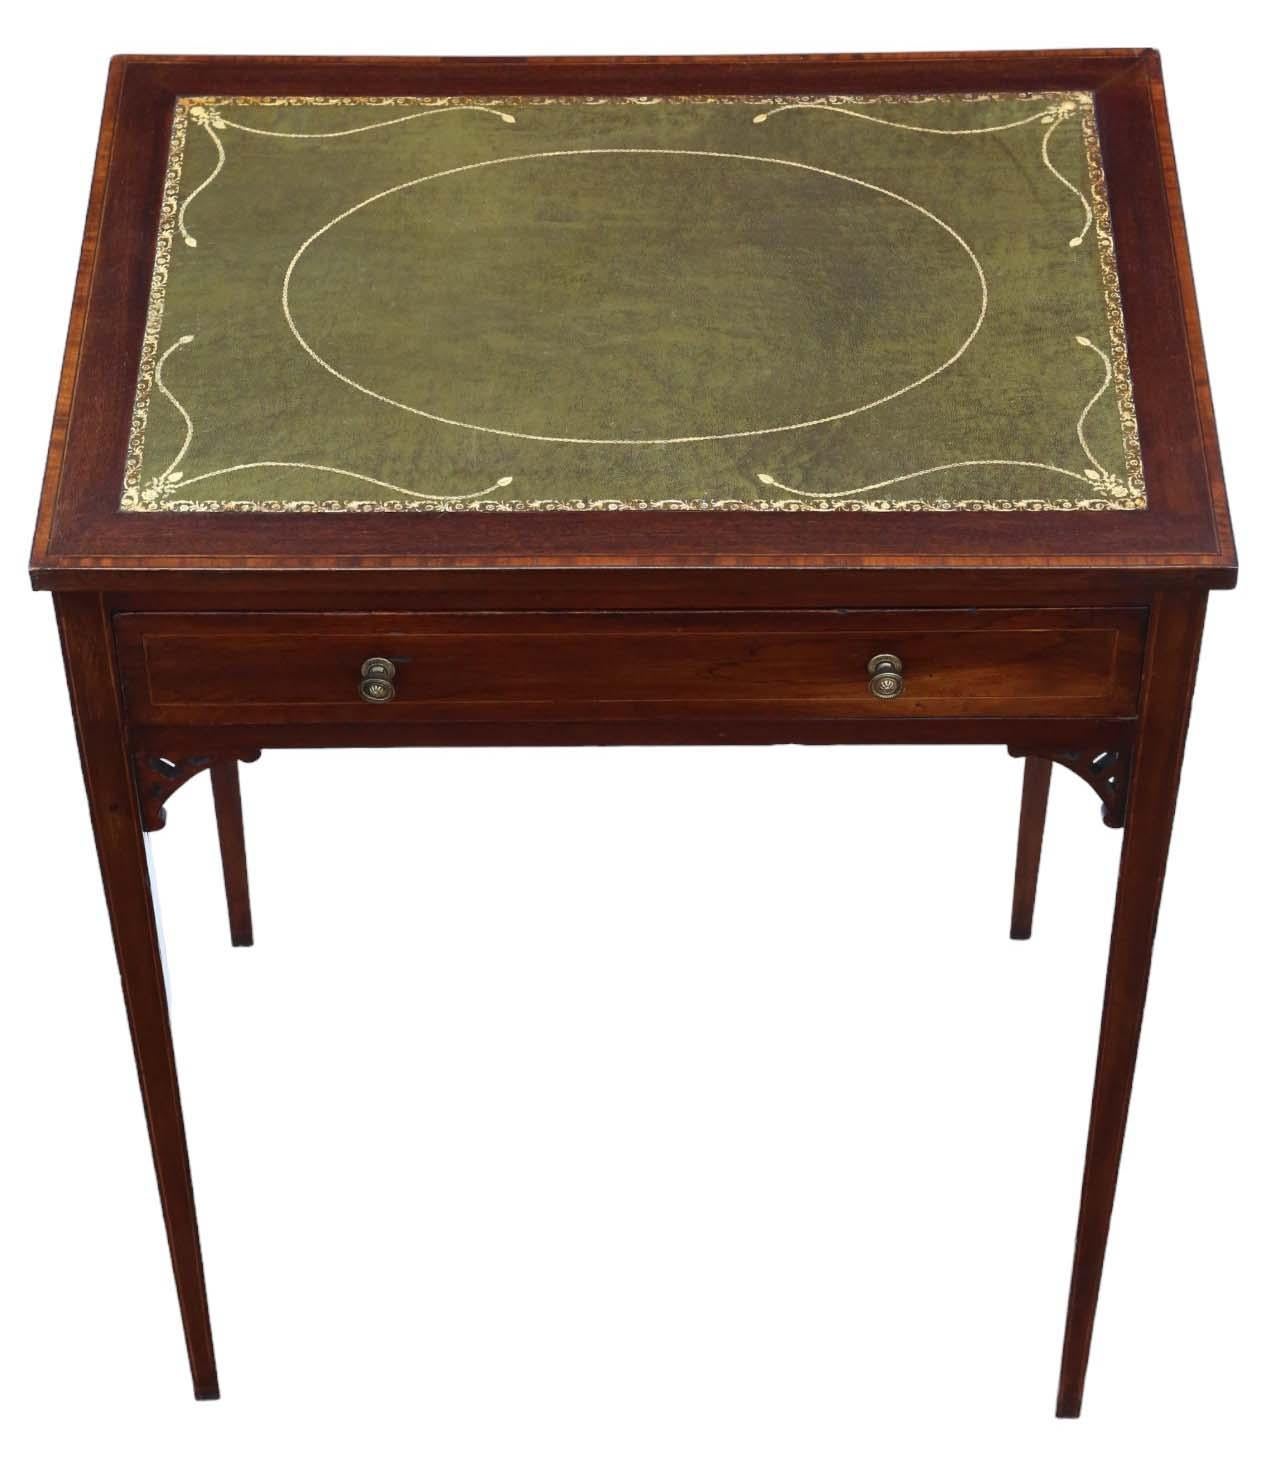 Antique Fine Quality C1900 Inlaid Mahogany Ladies Writing Table Desk Dressing In Good Condition For Sale In Wisbech, Cambridgeshire